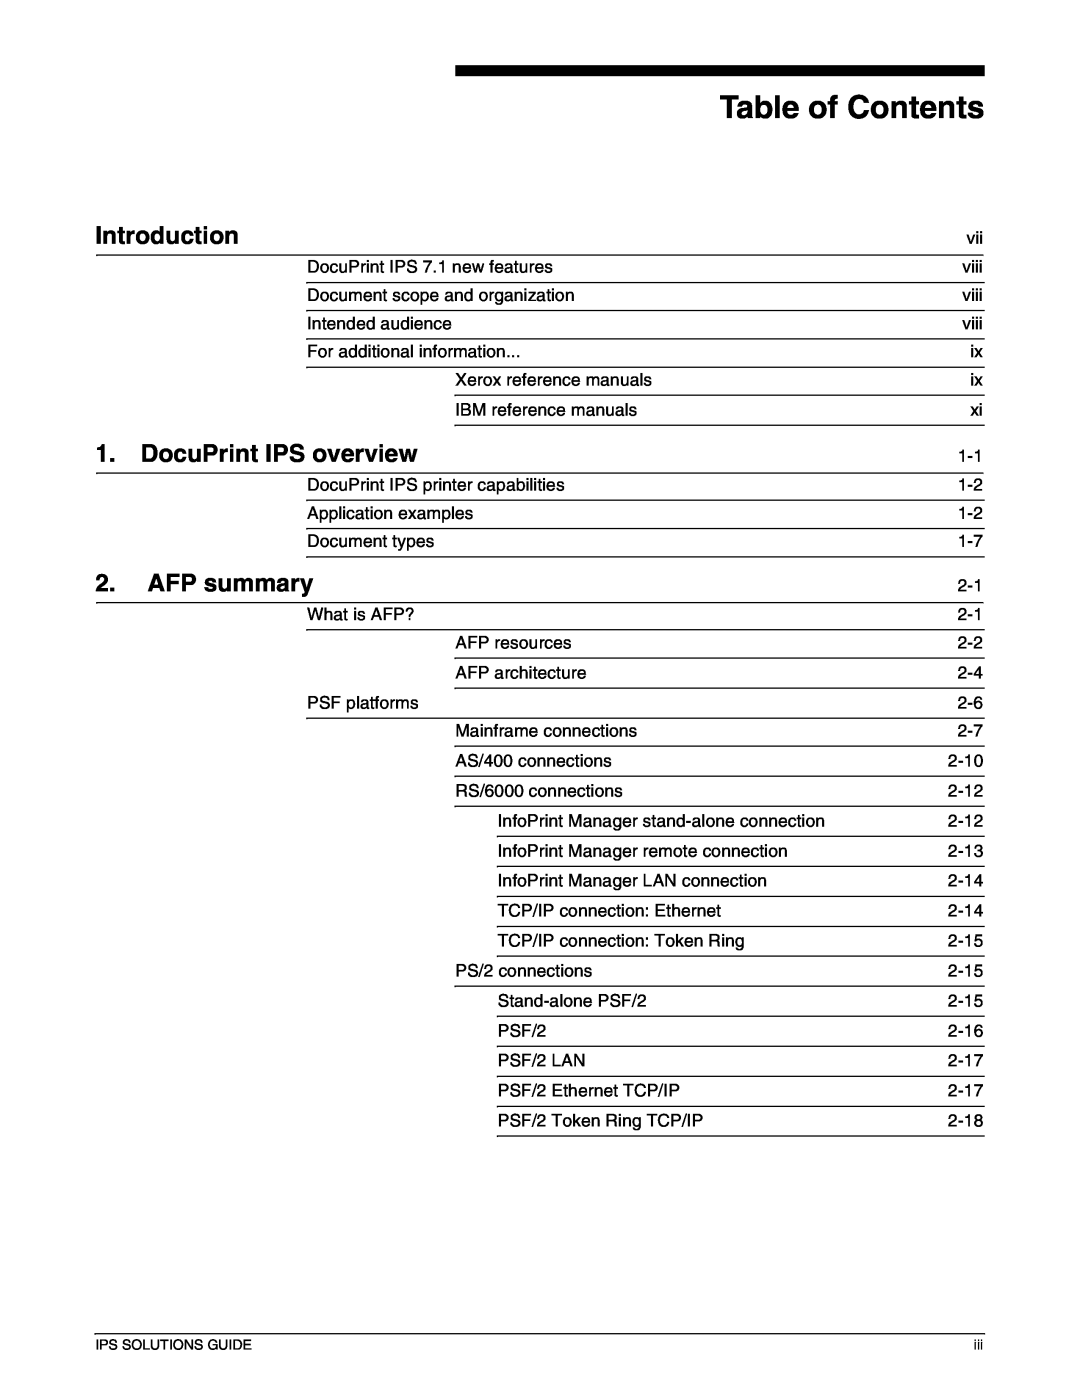 Xerox 721P88200 manual Table of Contents, Introduction, DocuPrint IPS overview, AFP summary 